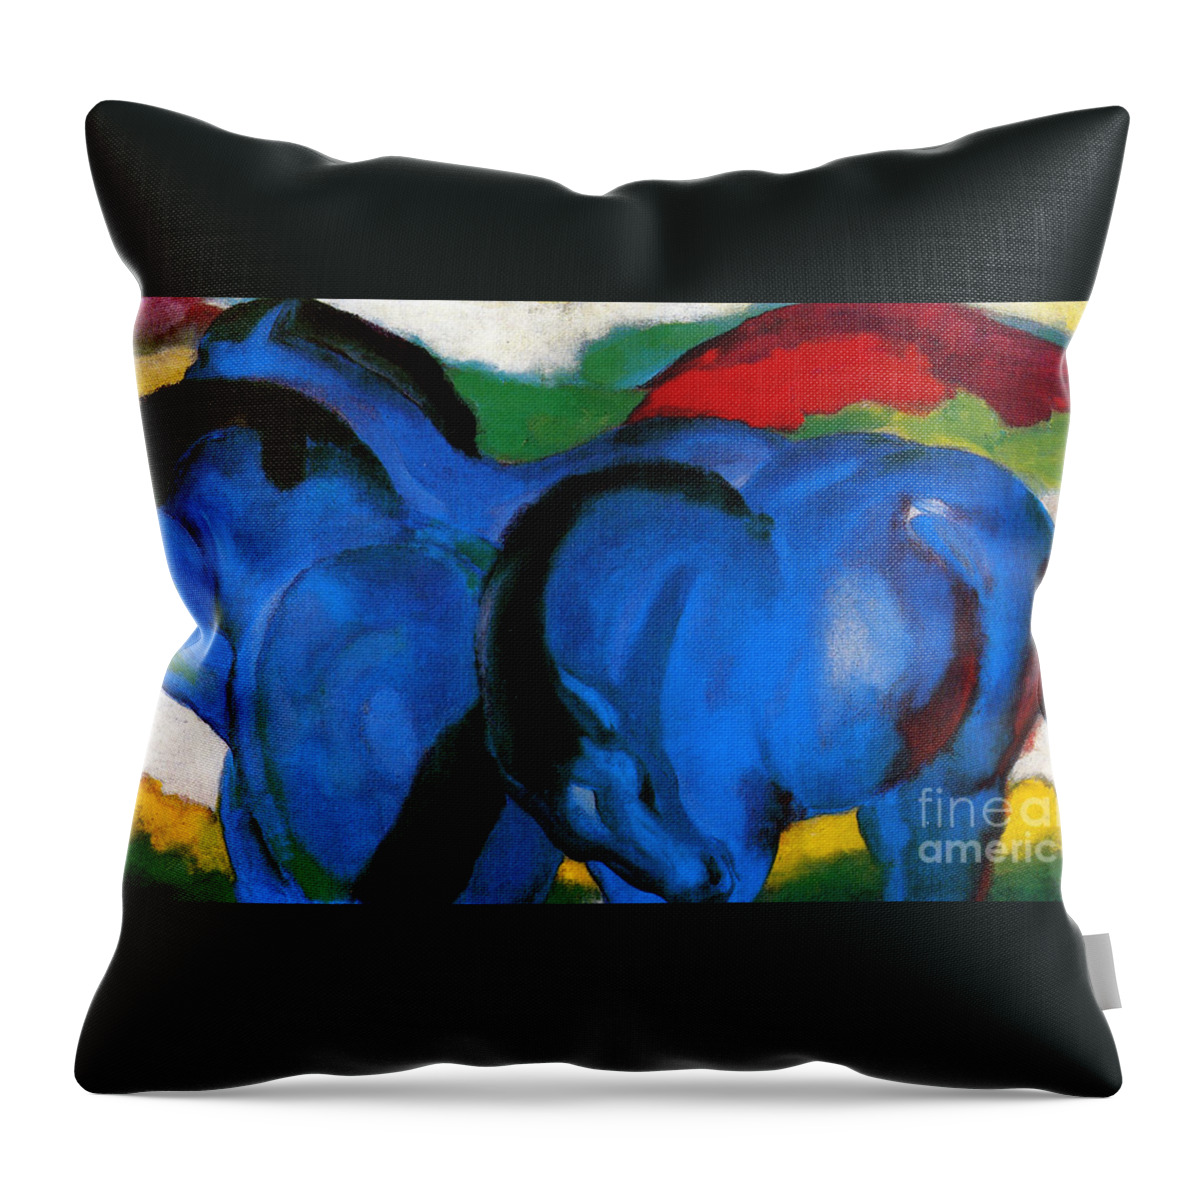 The Little Blue Horses Throw Pillow featuring the painting The Little Blue Horses, 1911 by Franz Marc